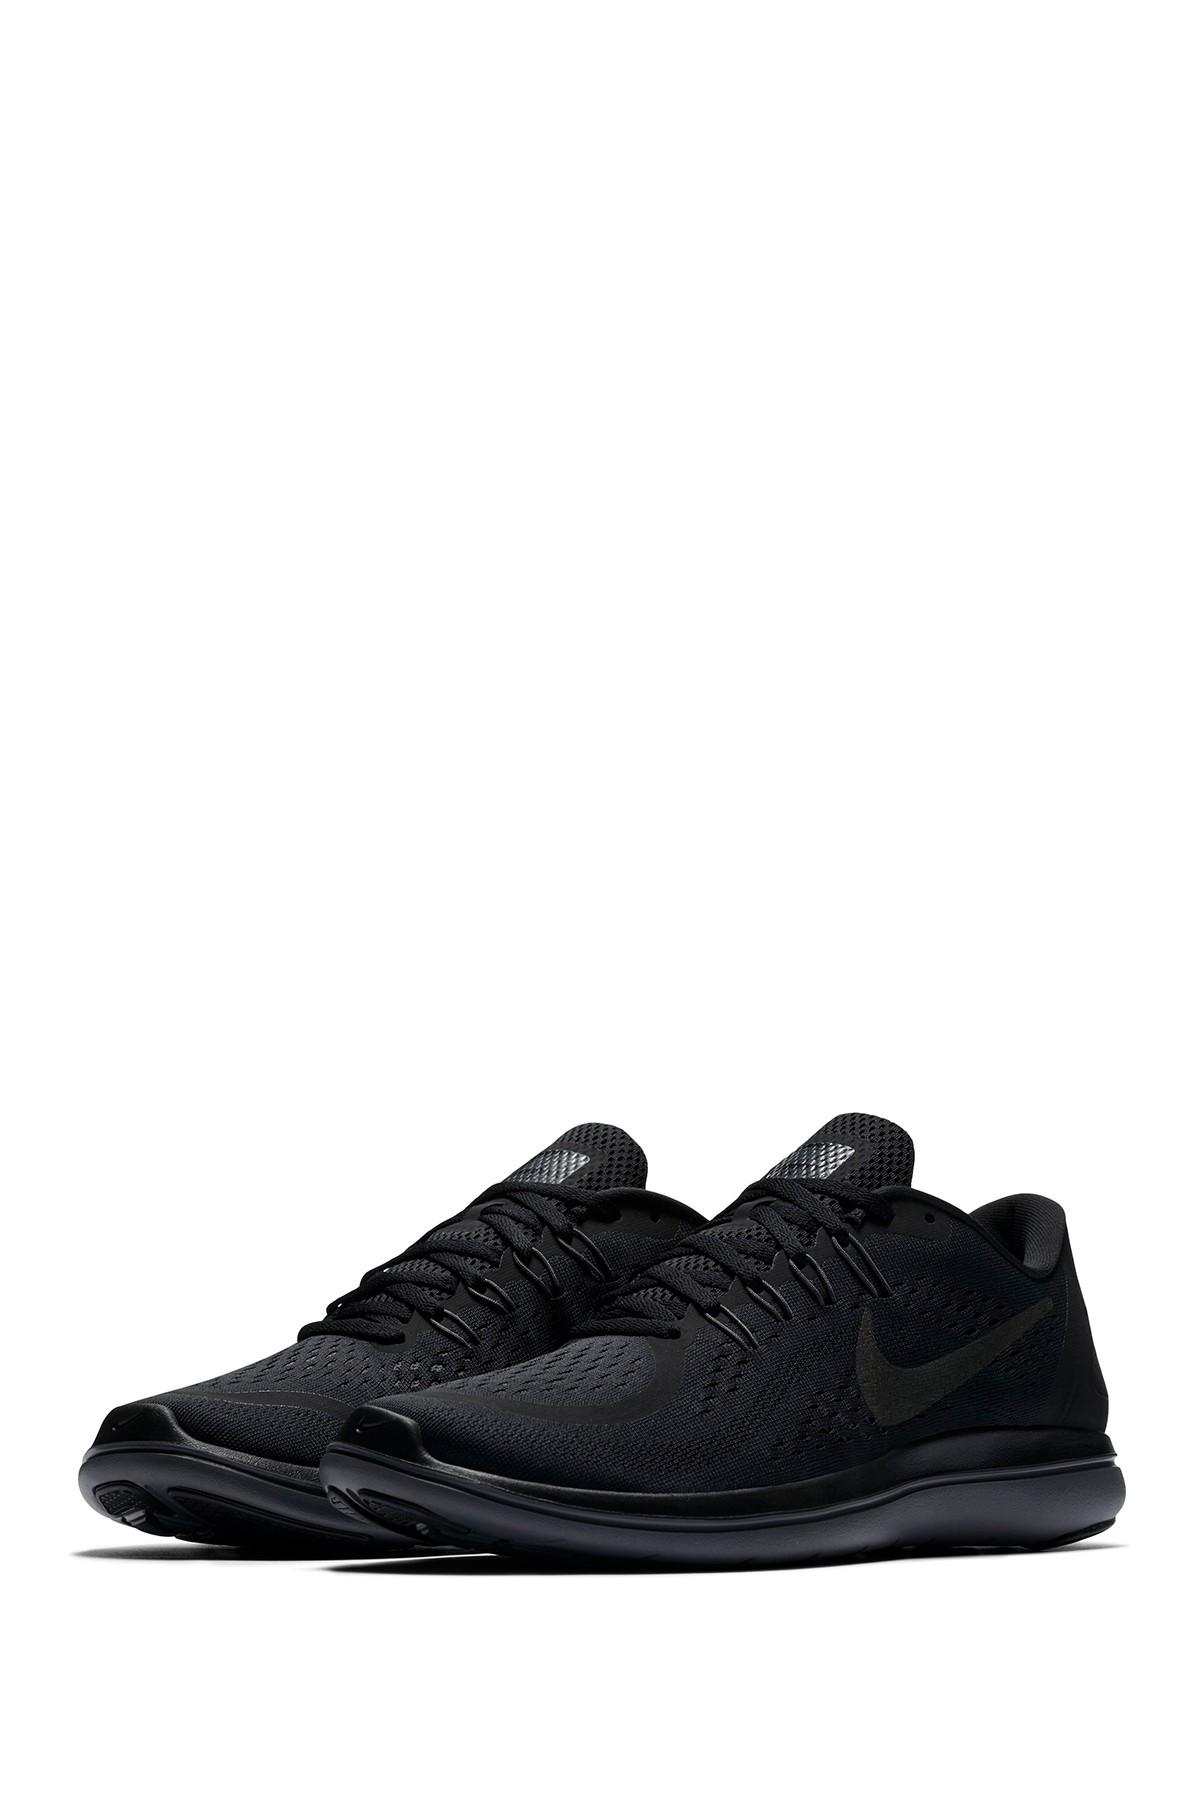 Nike Synthetic Flex 2017 Rn Shoes - Size 8.5 in Black for Men - Lyst